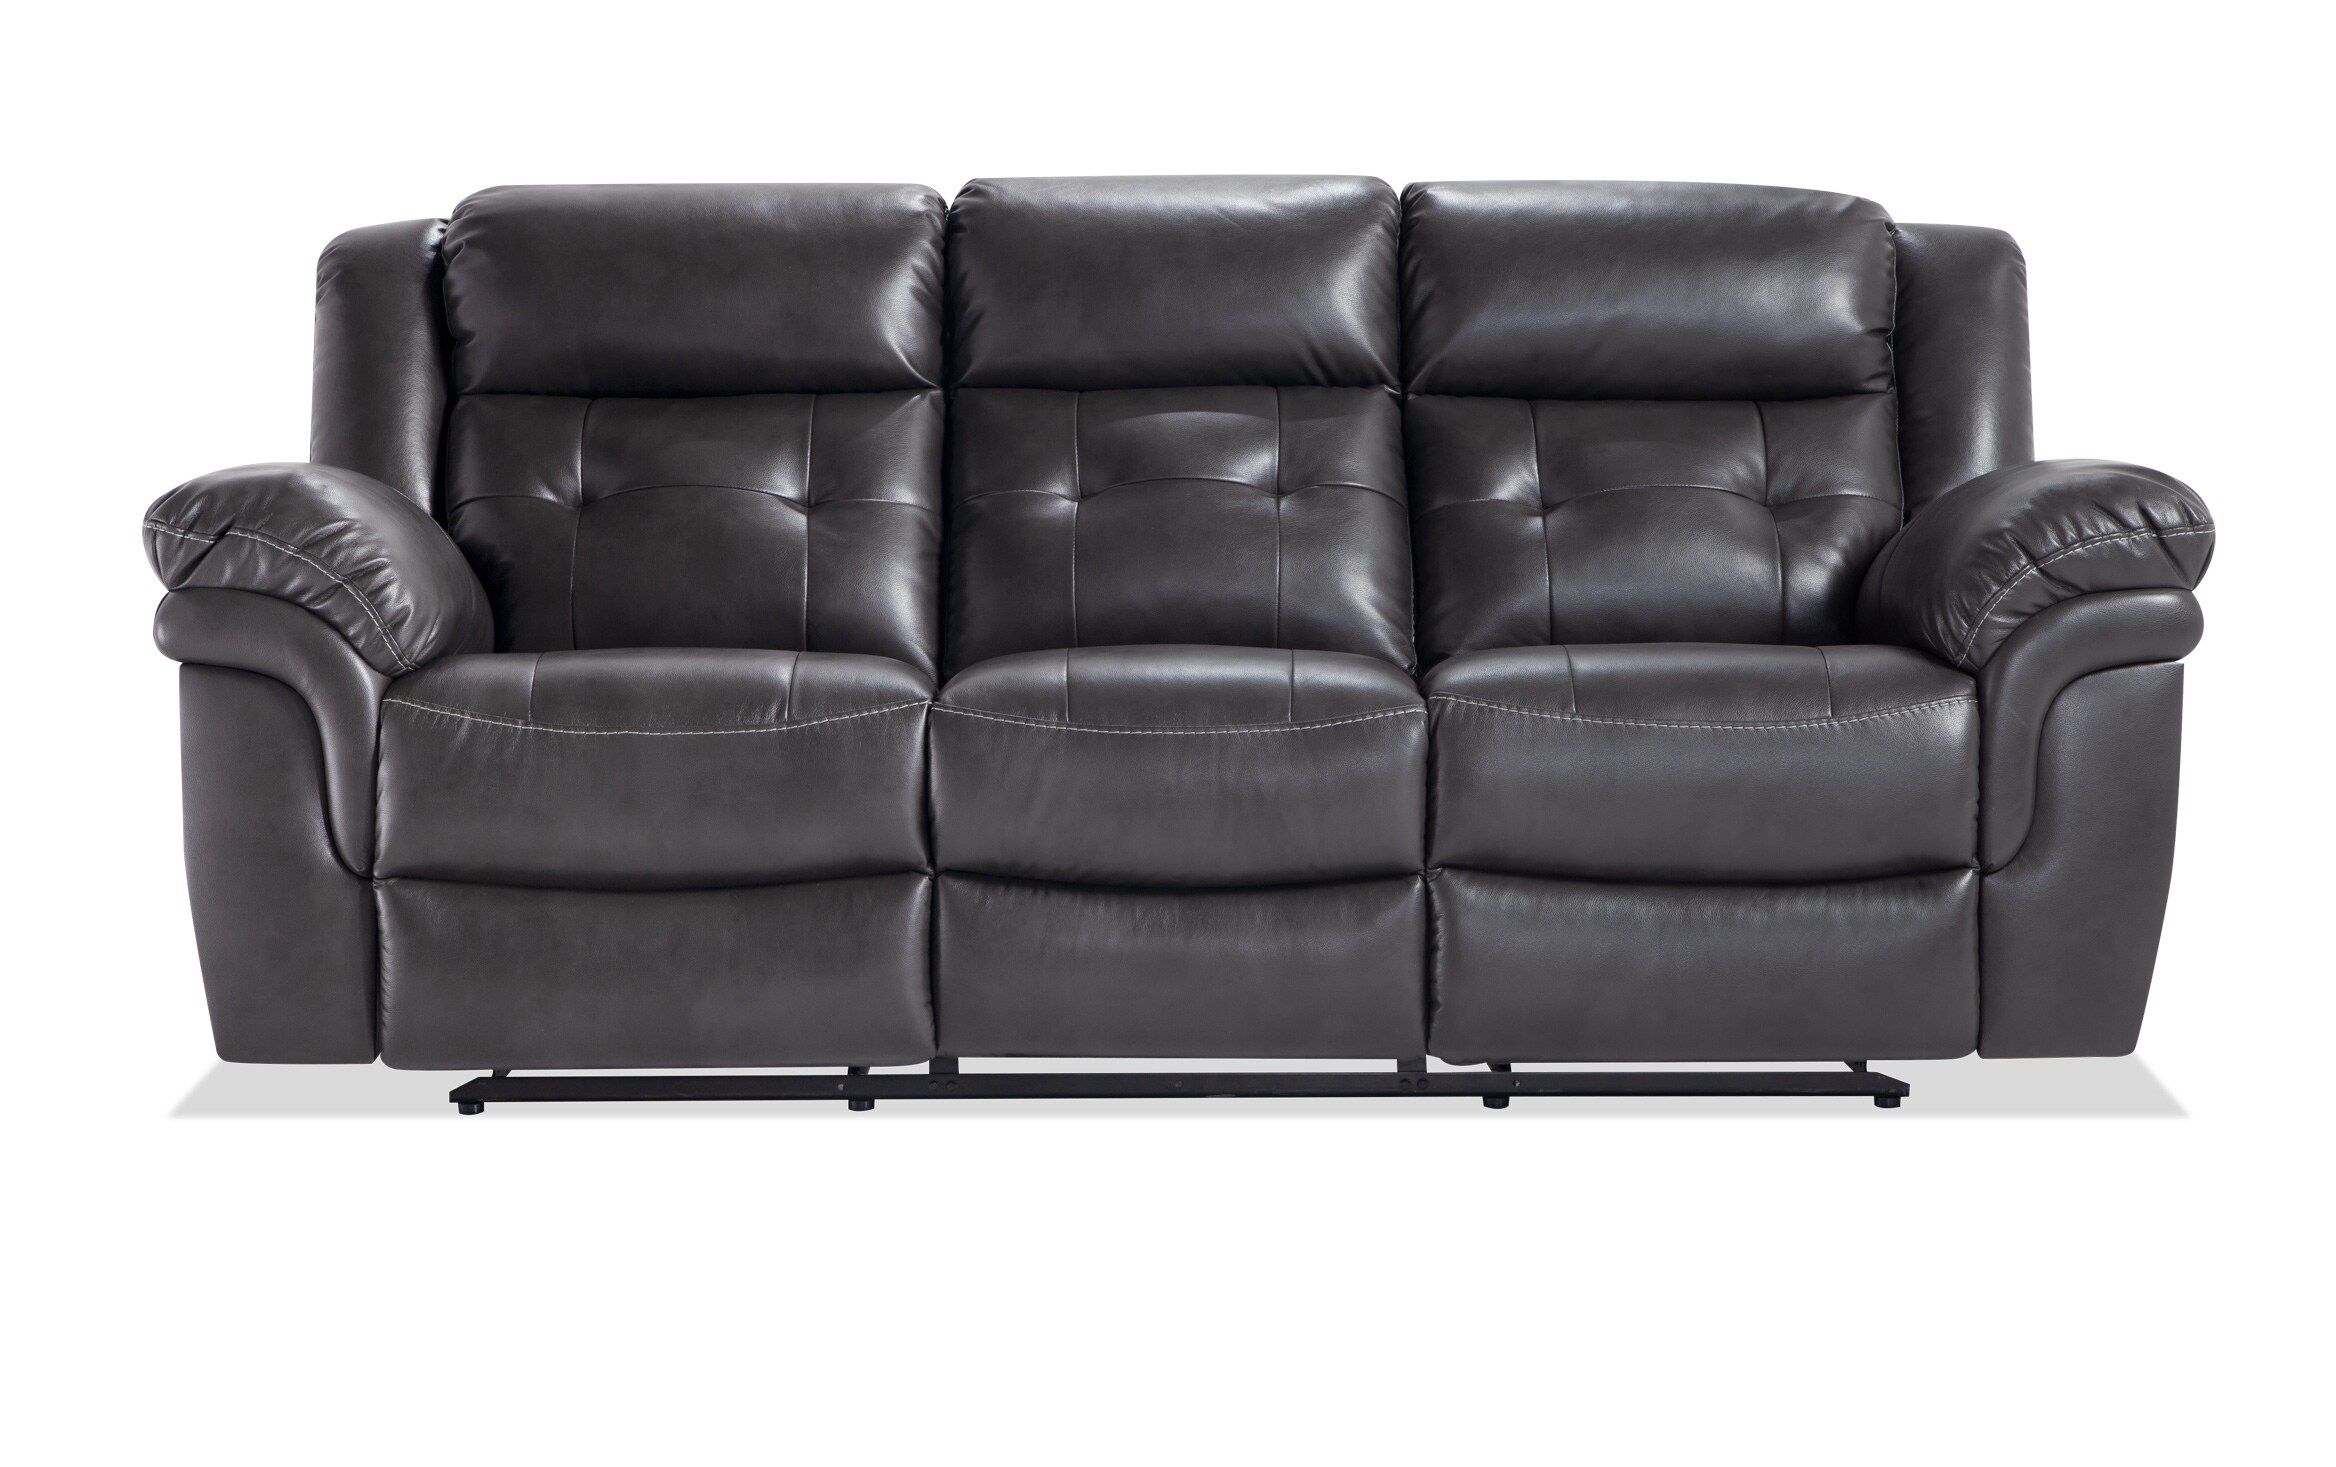 [Download 25+] Bobs Furniture Leather Living Room Sets Within Panther Black Leather Dual Power Reclining Sofas (View 1 of 15)